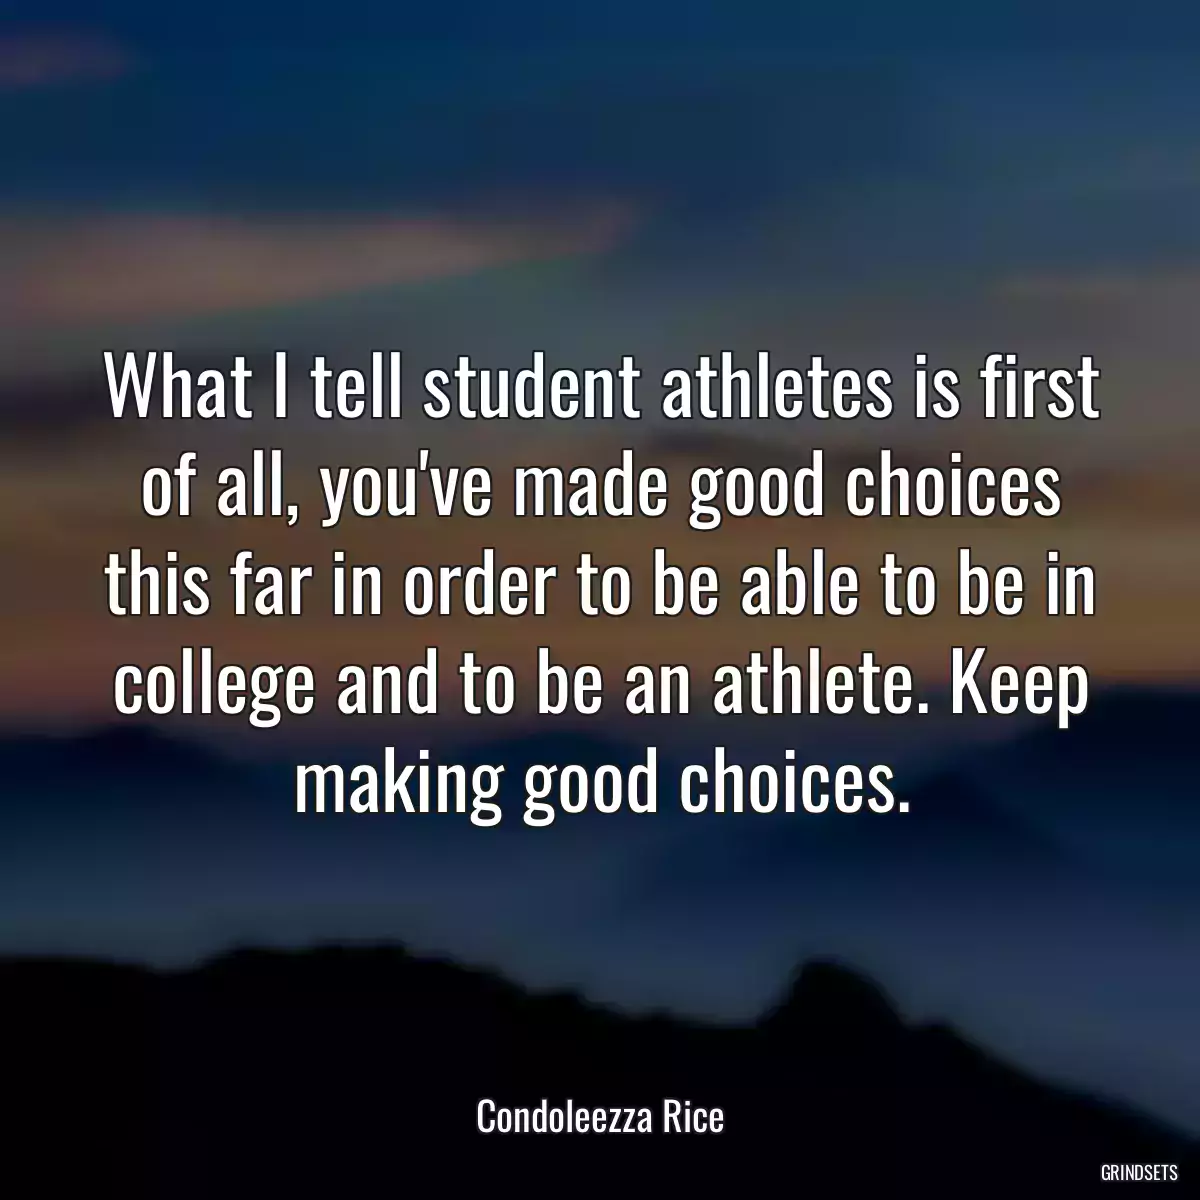 What I tell student athletes is first of all, you\'ve made good choices this far in order to be able to be in college and to be an athlete. Keep making good choices.